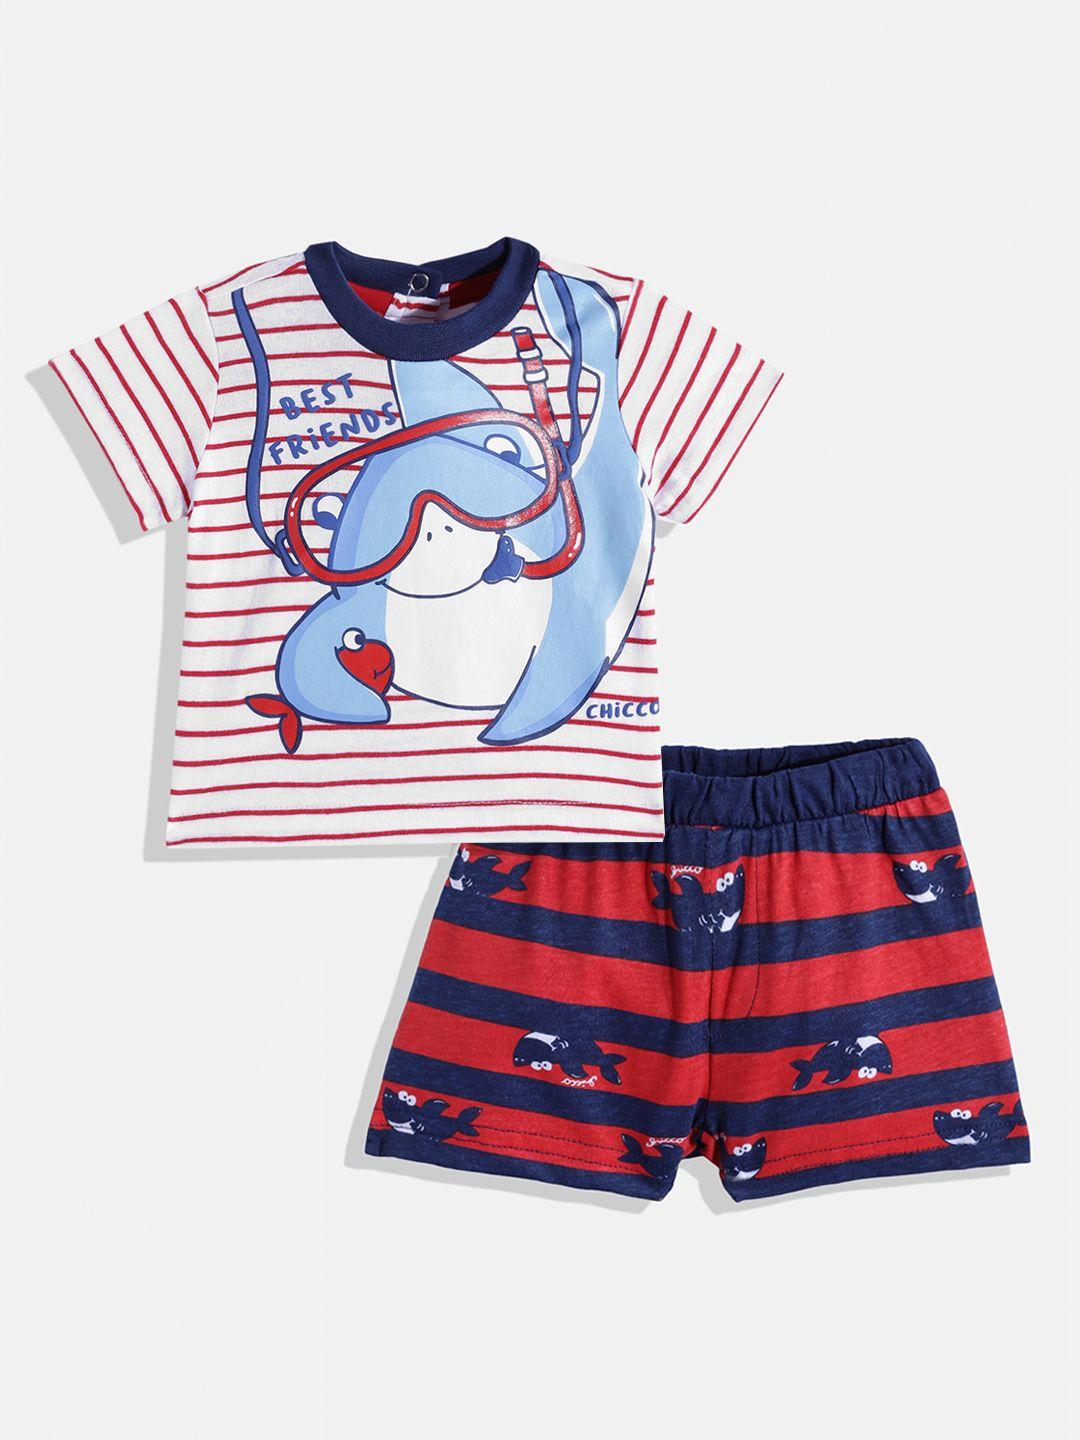 chicco-infant-boys-white-&-red-striped-&-graphic-print-cotton-clothing-set